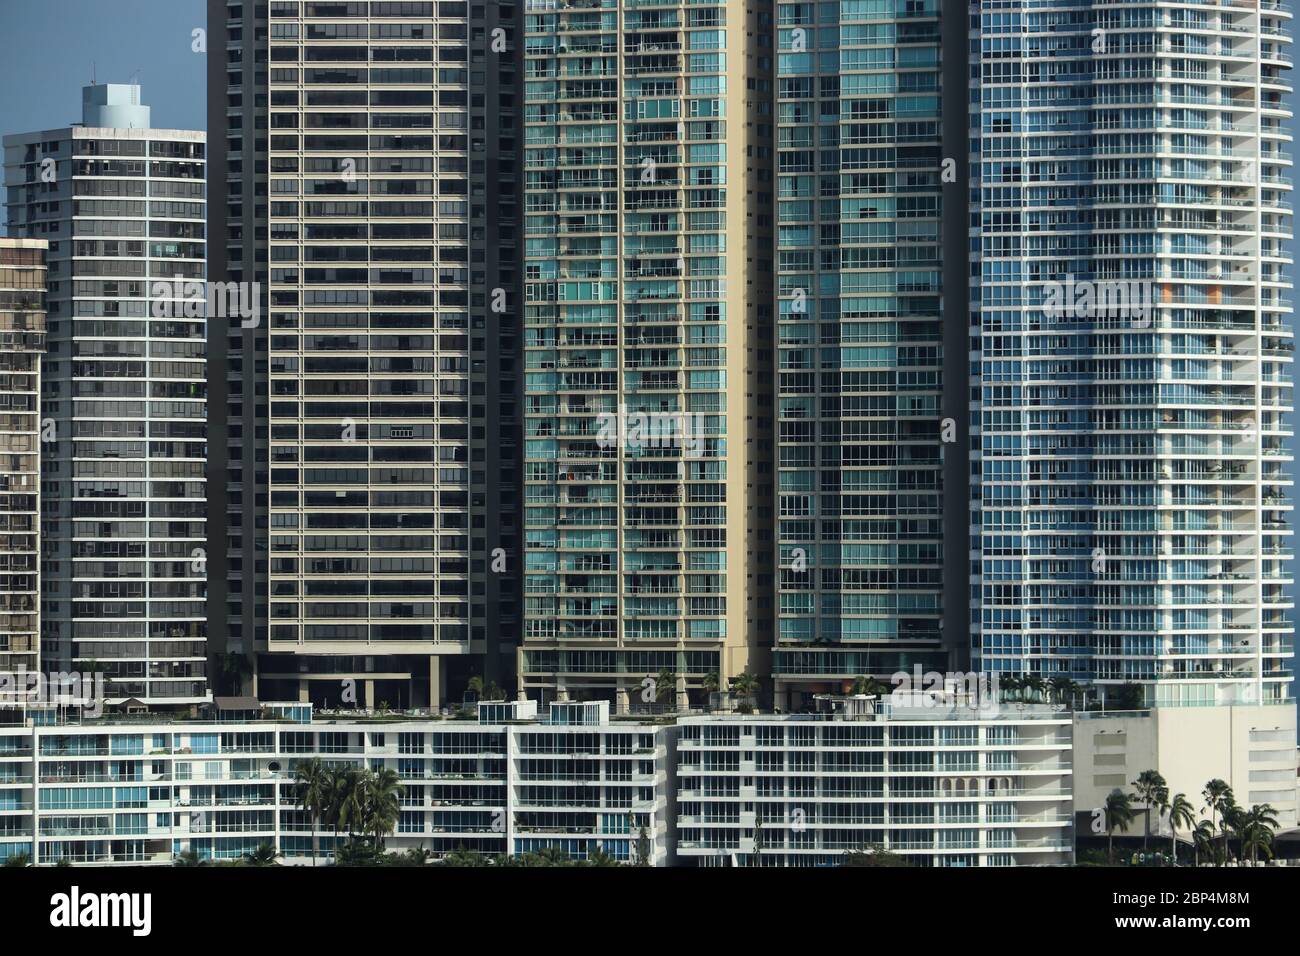 Hundreds of condominiums in densely packed high rise buildings in the center of Panama City, Panama, create a wall of windows. Background use. Stock Photo